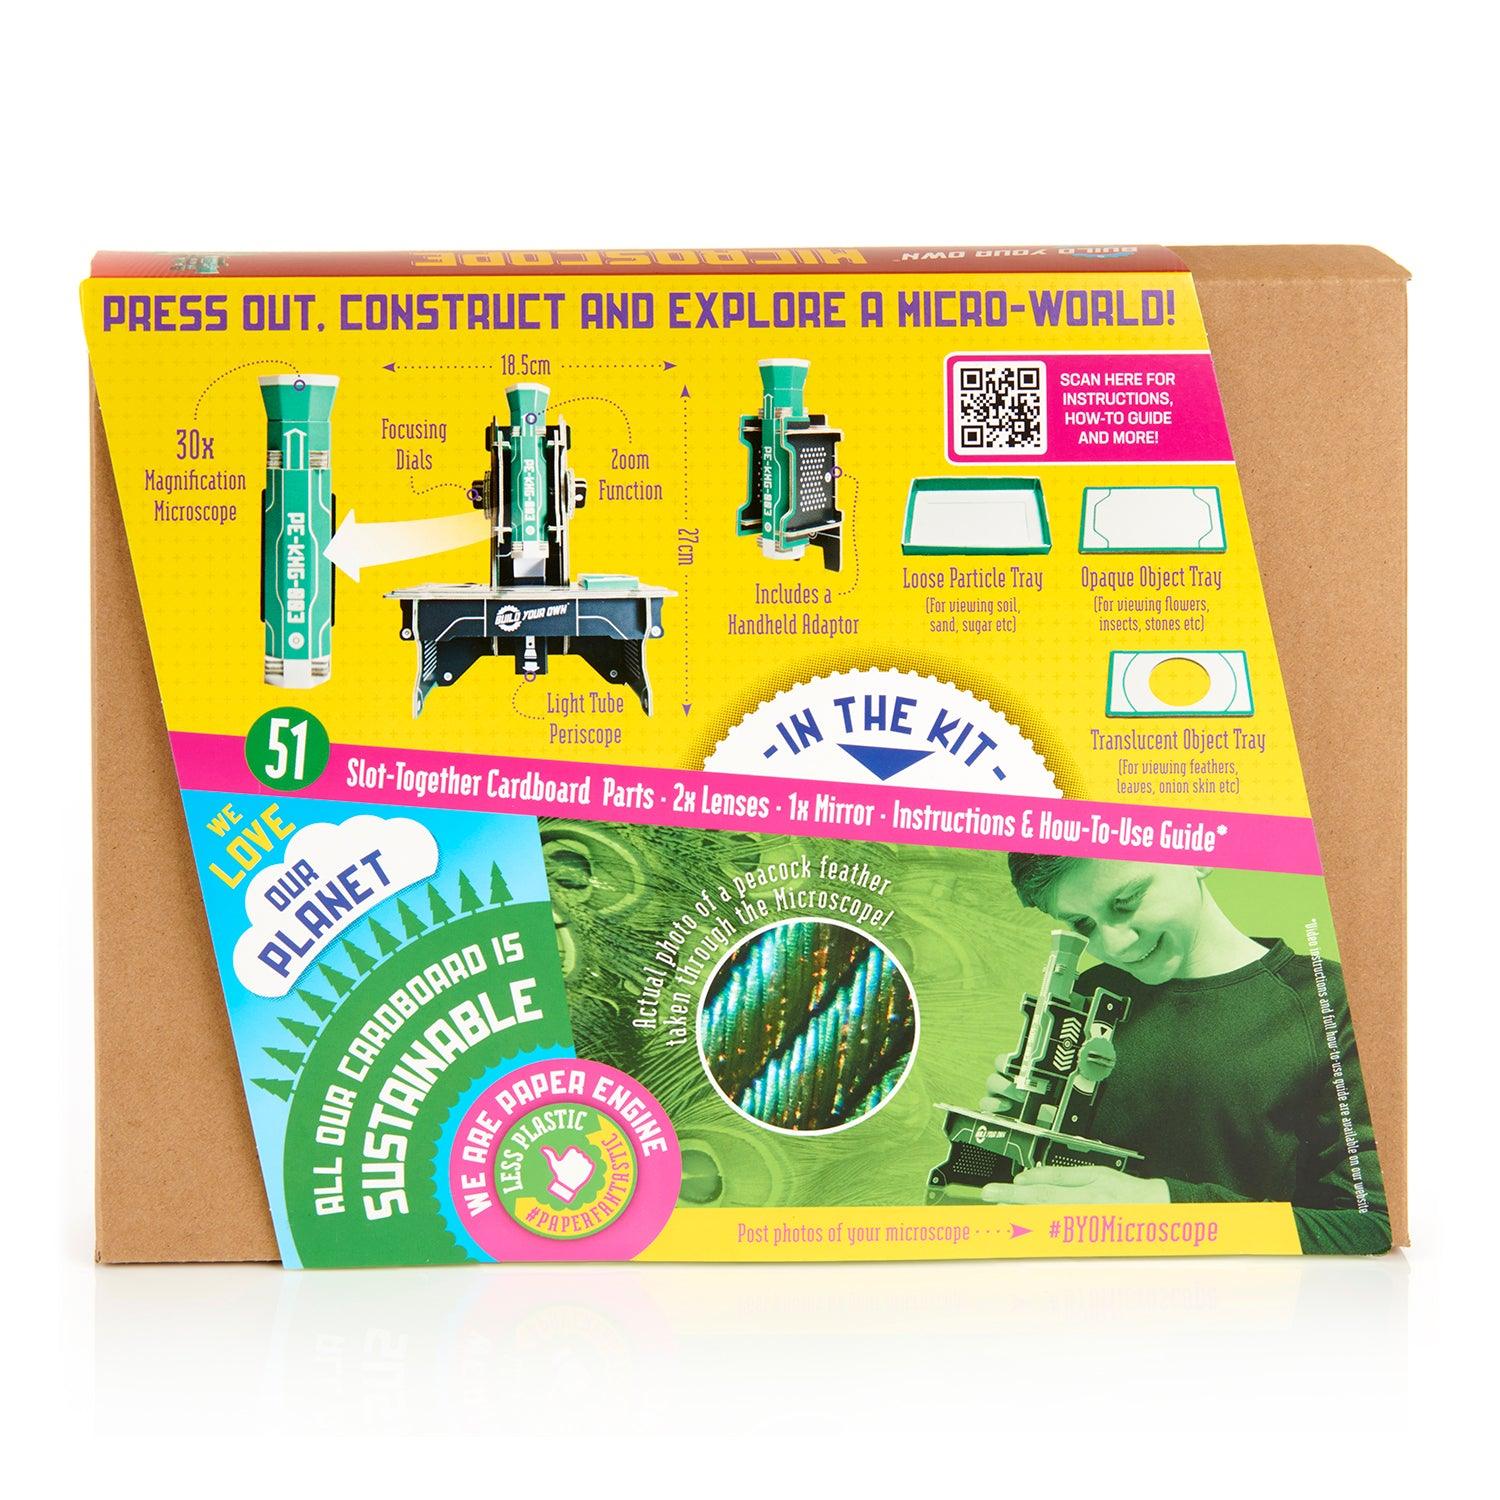 Build Your Own Microscope Kit - Kits - Science Museum Shop